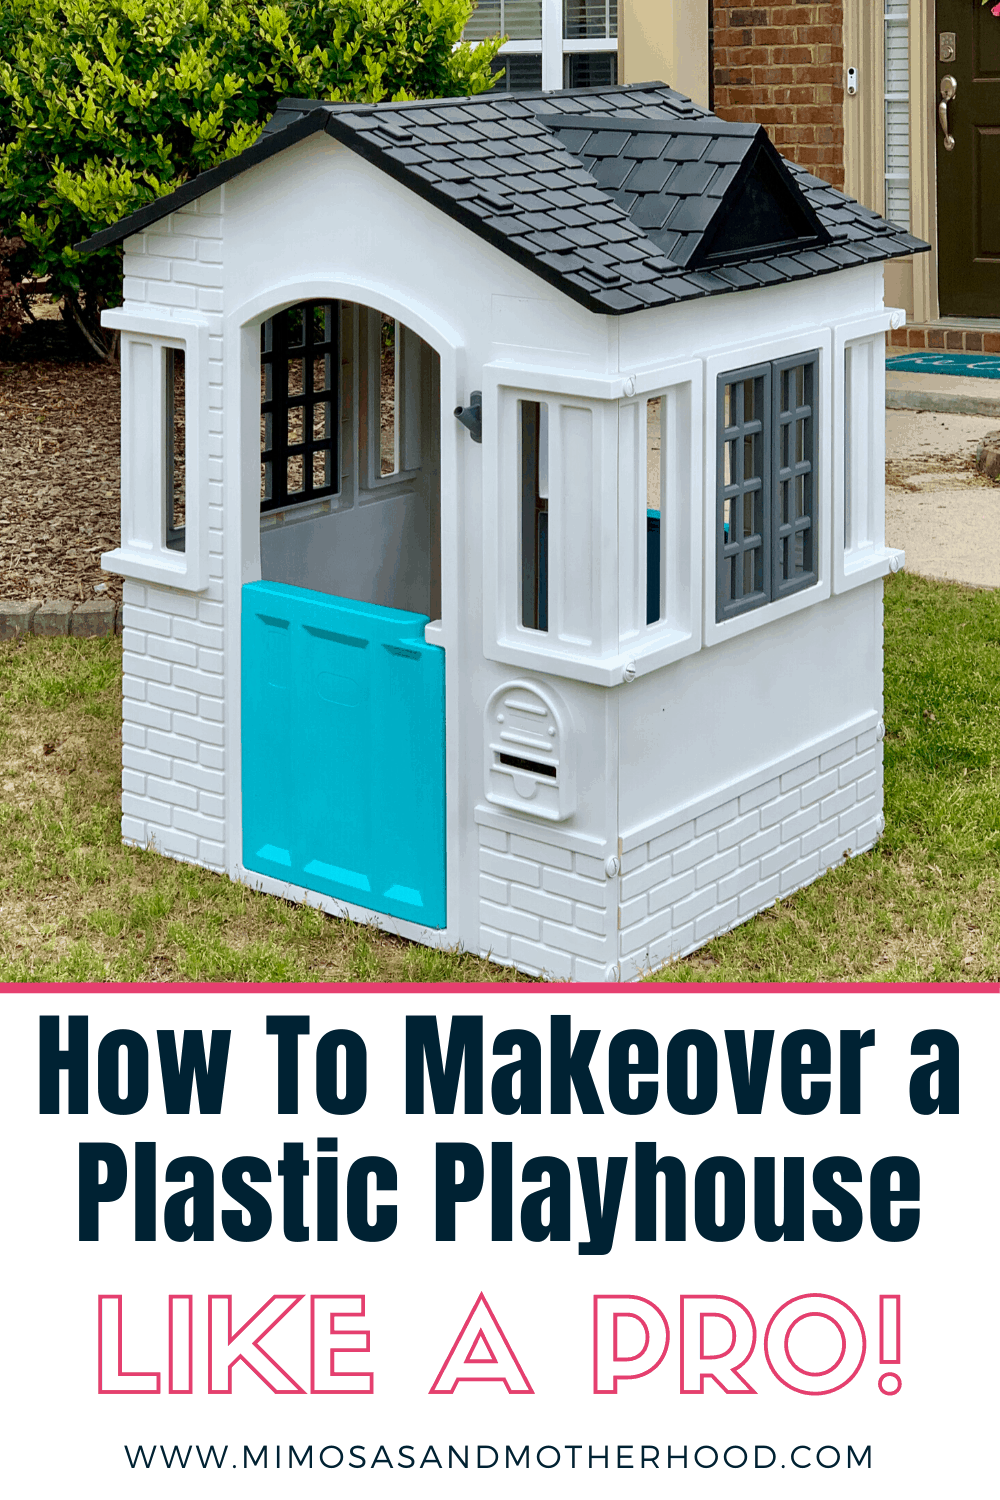 Create a Plastic Playhouse Makeover!